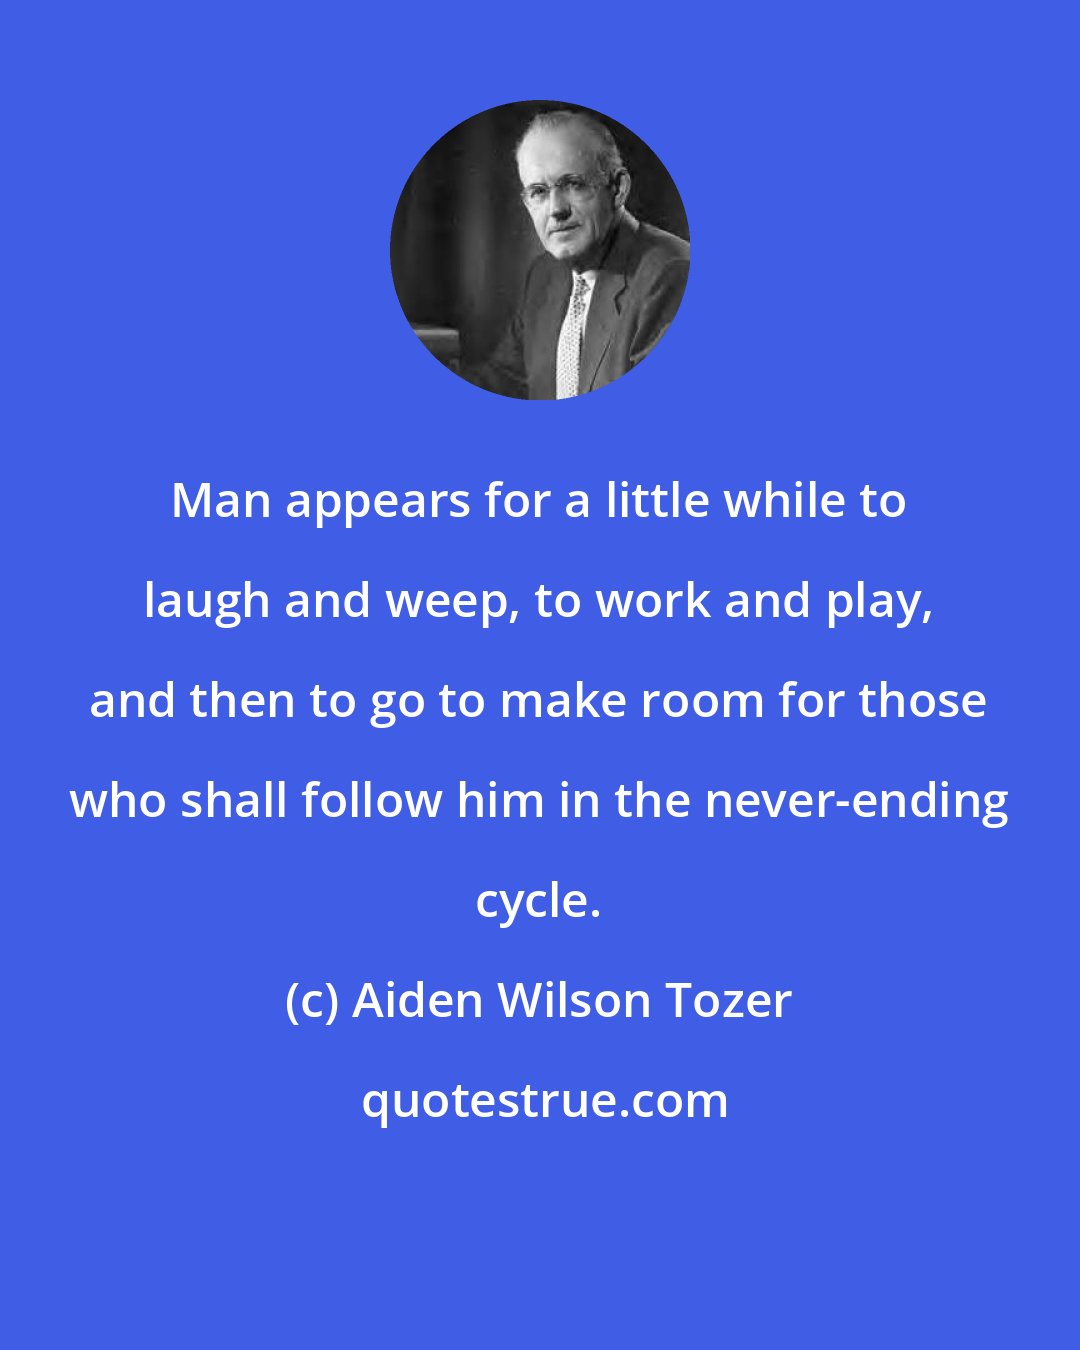 Aiden Wilson Tozer: Man appears for a little while to laugh and weep, to work and play, and then to go to make room for those who shall follow him in the never-ending cycle.